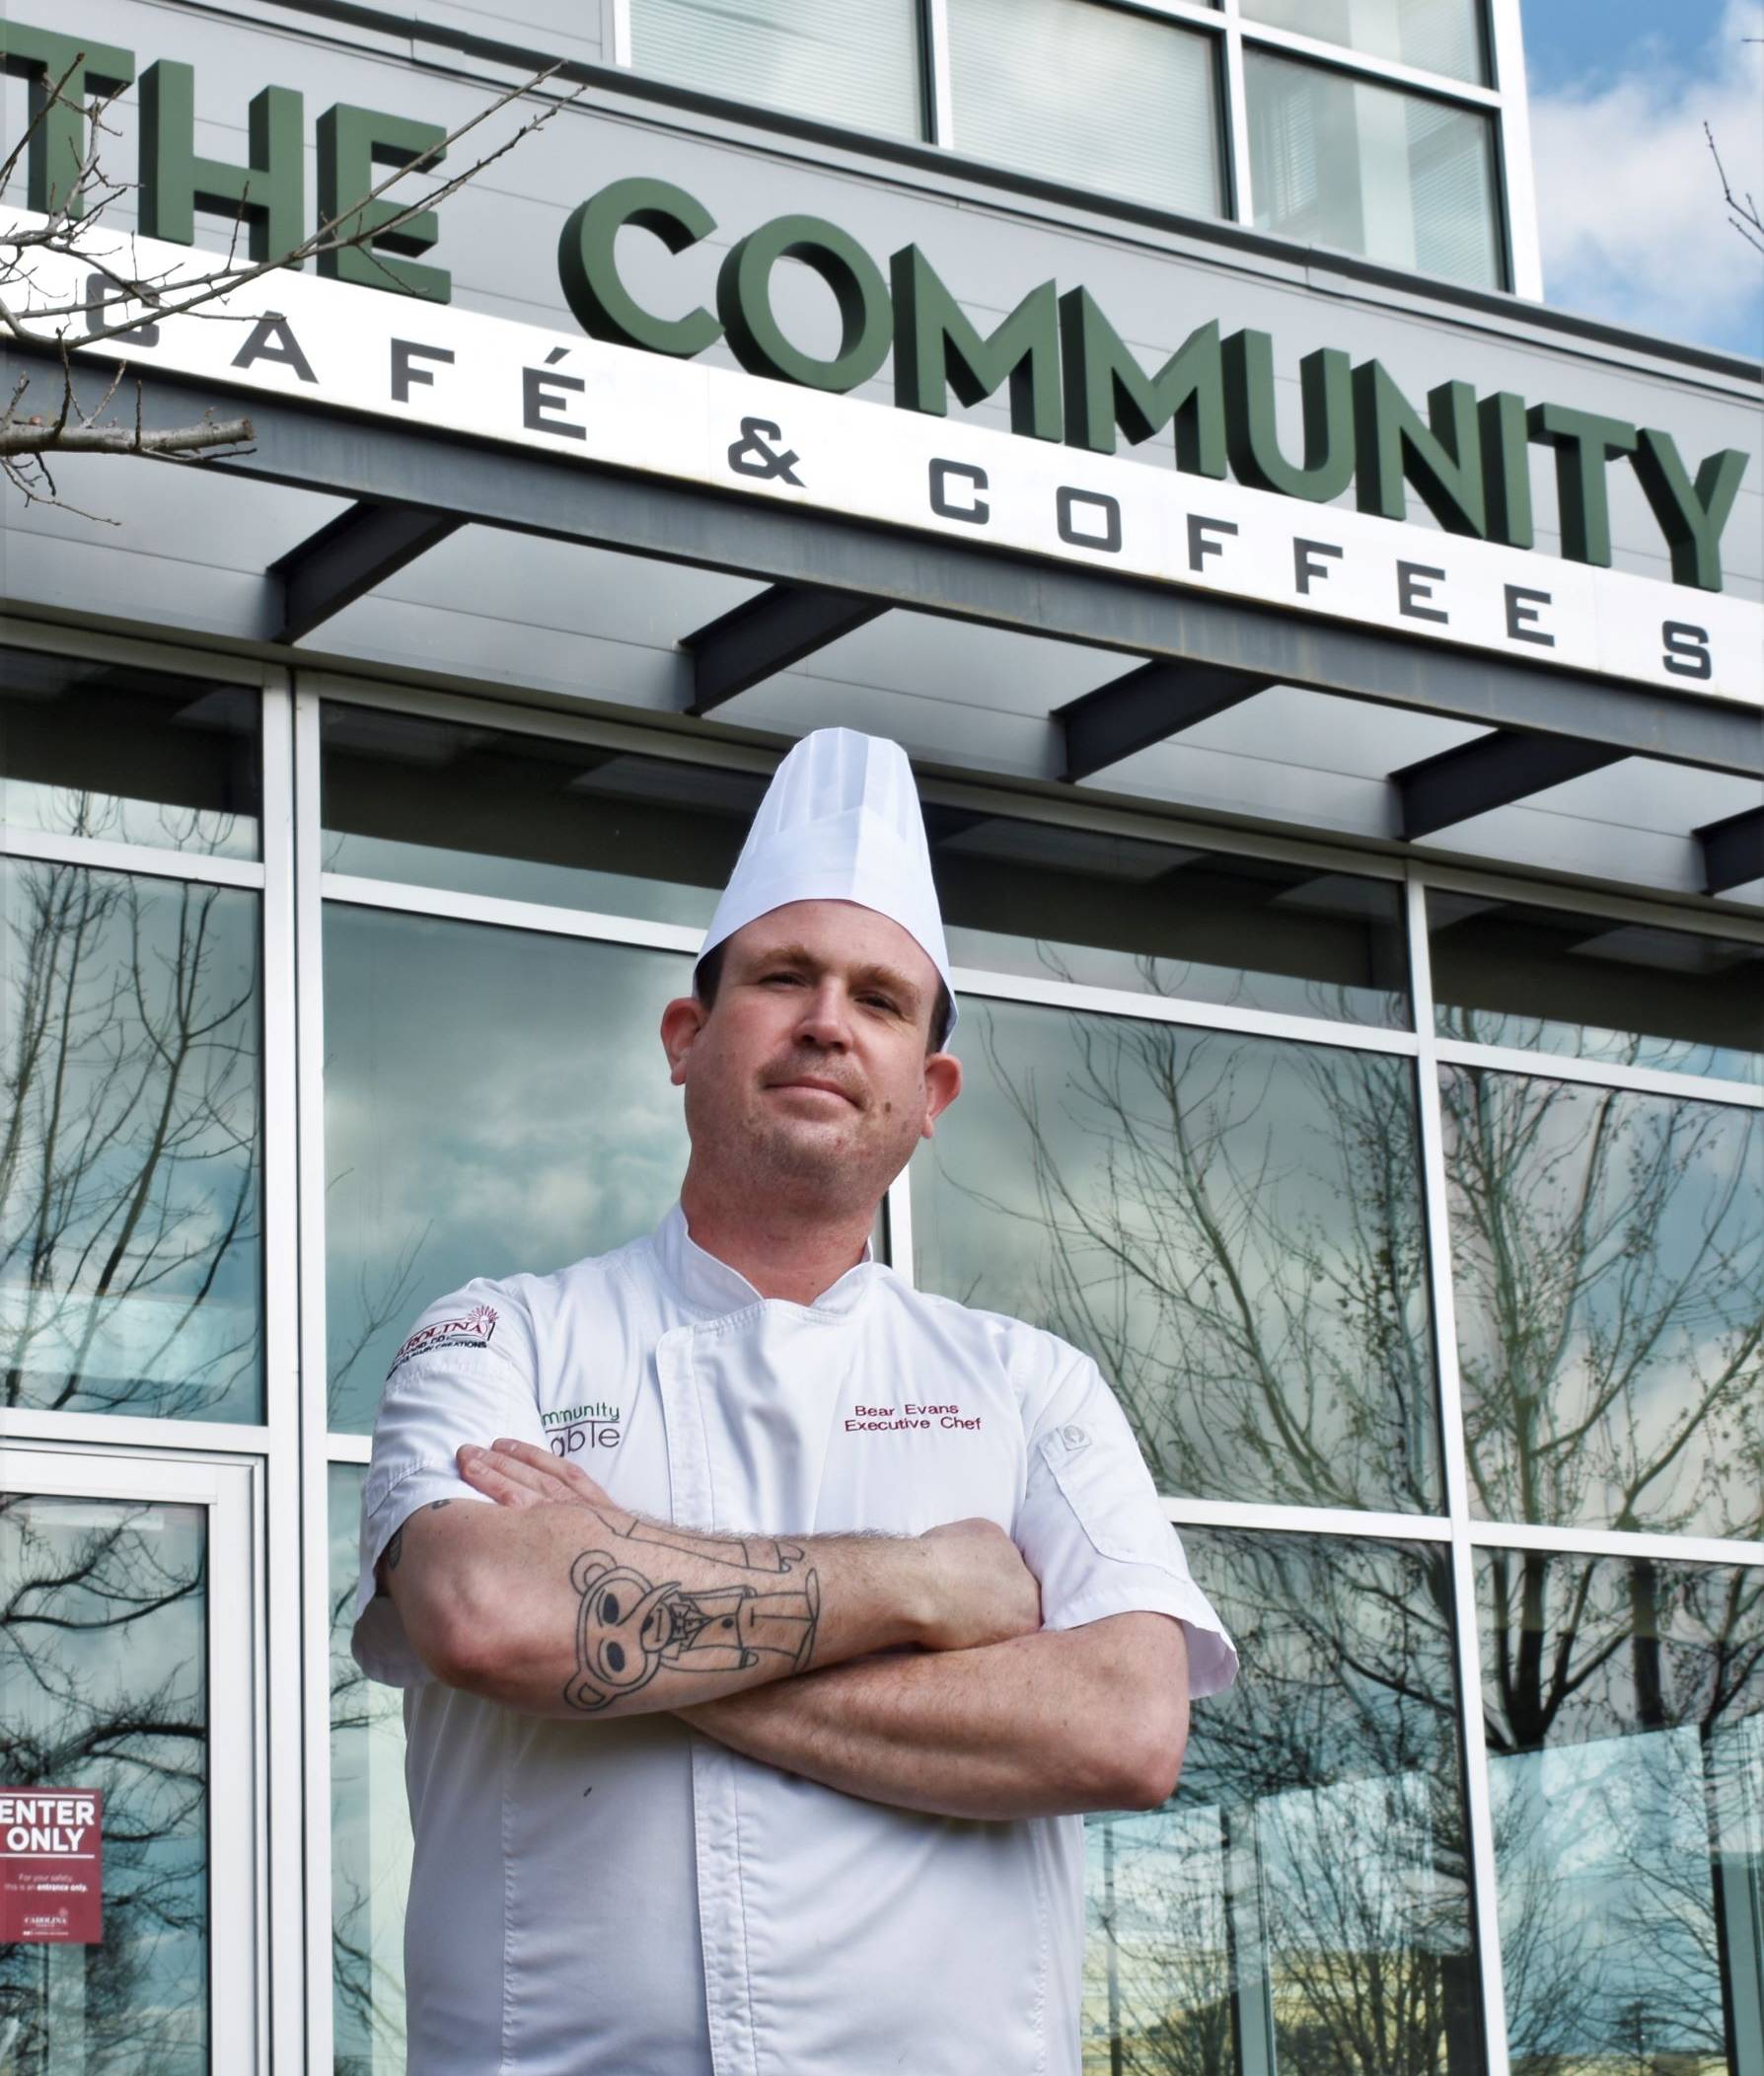 Chef Bear Evans standing with his arms crossed outside in from of a sign that reads "The Community Table Cafe and Coffee Shop"